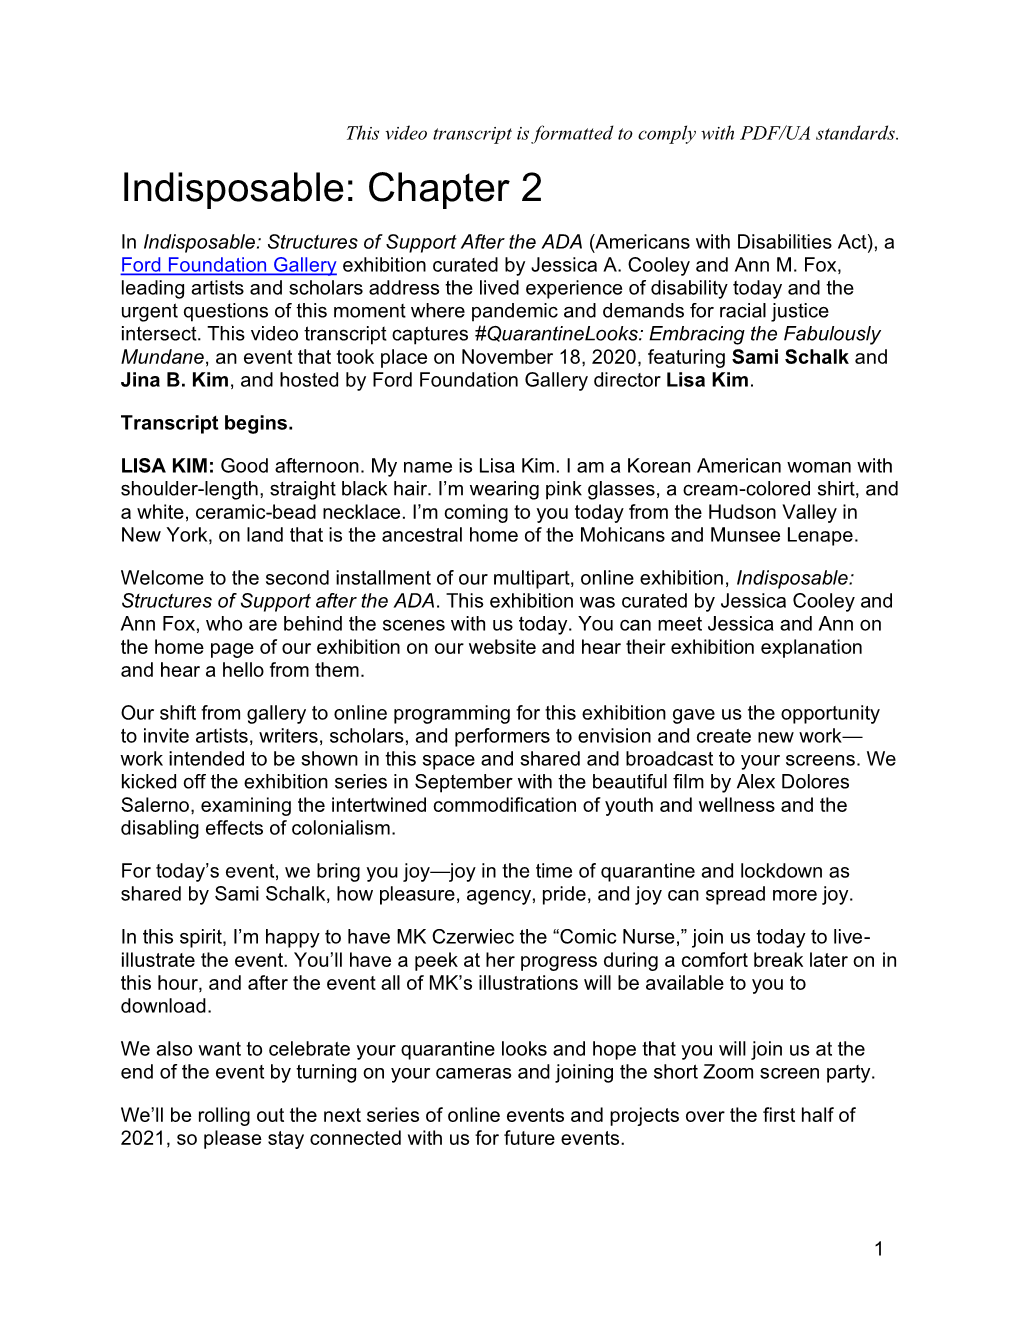 Indisposable: Chapter 2